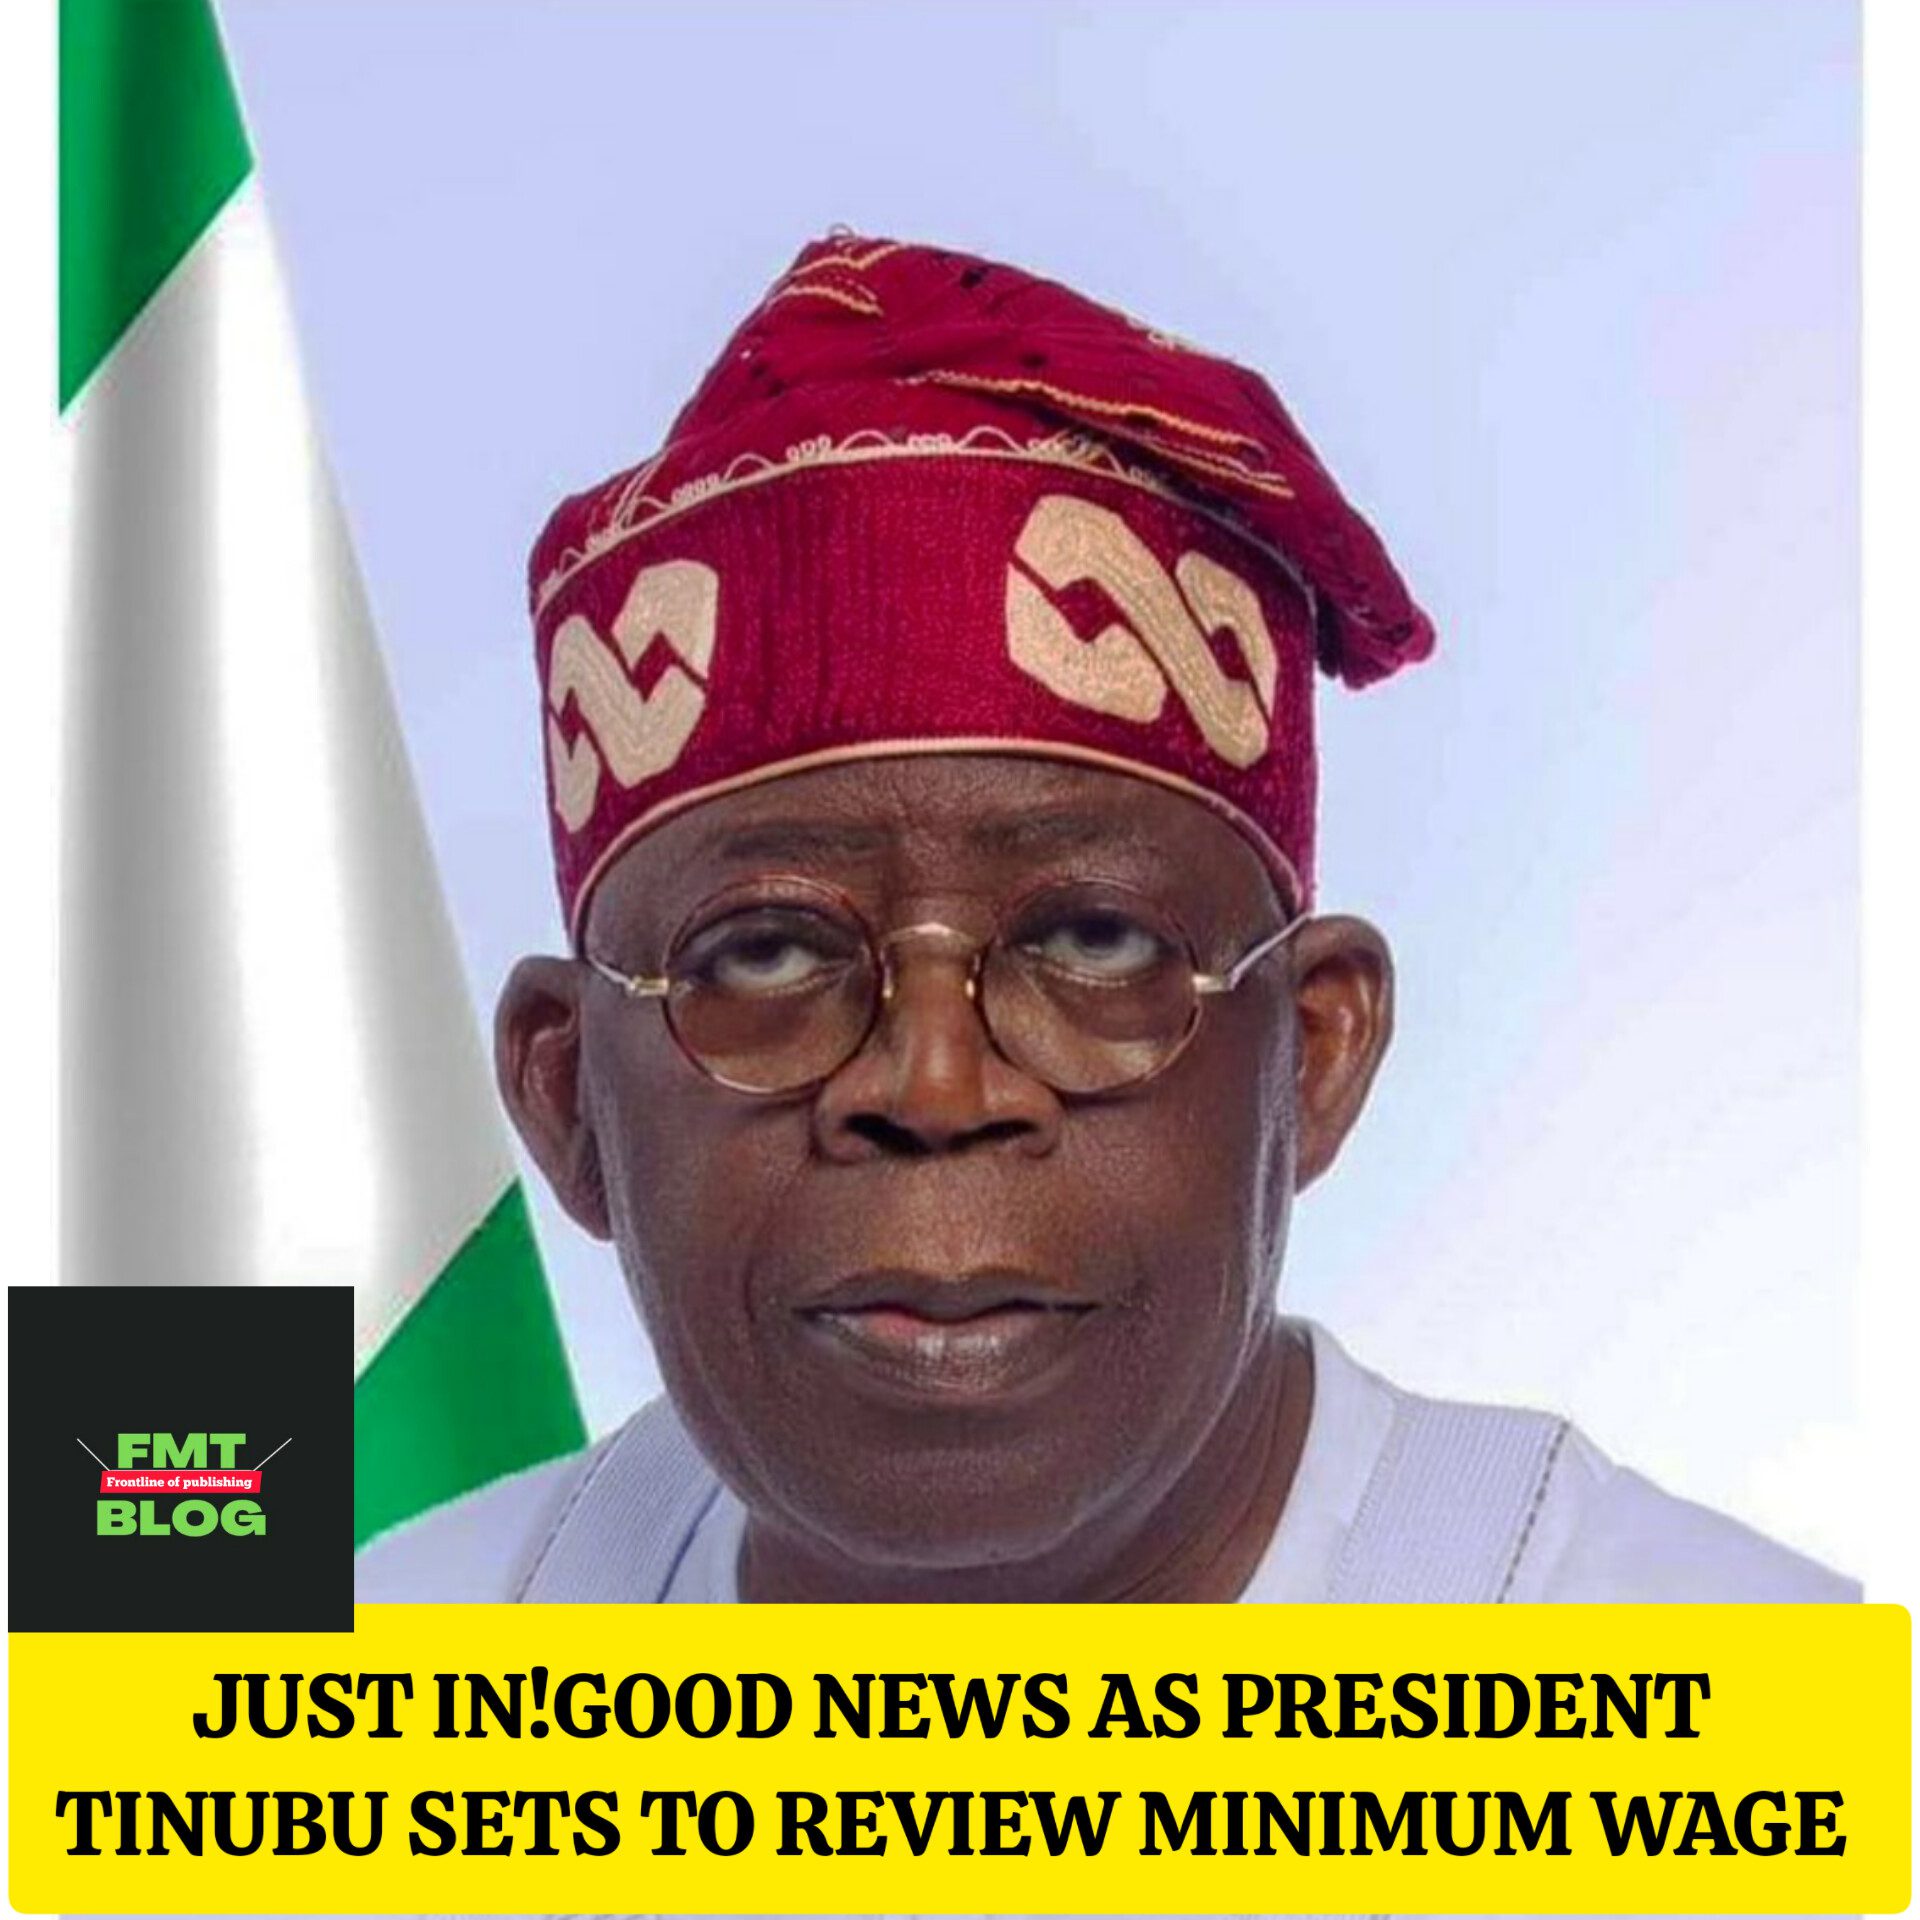 JUST IN! Good news as President Tinubu sets to review minimum wage